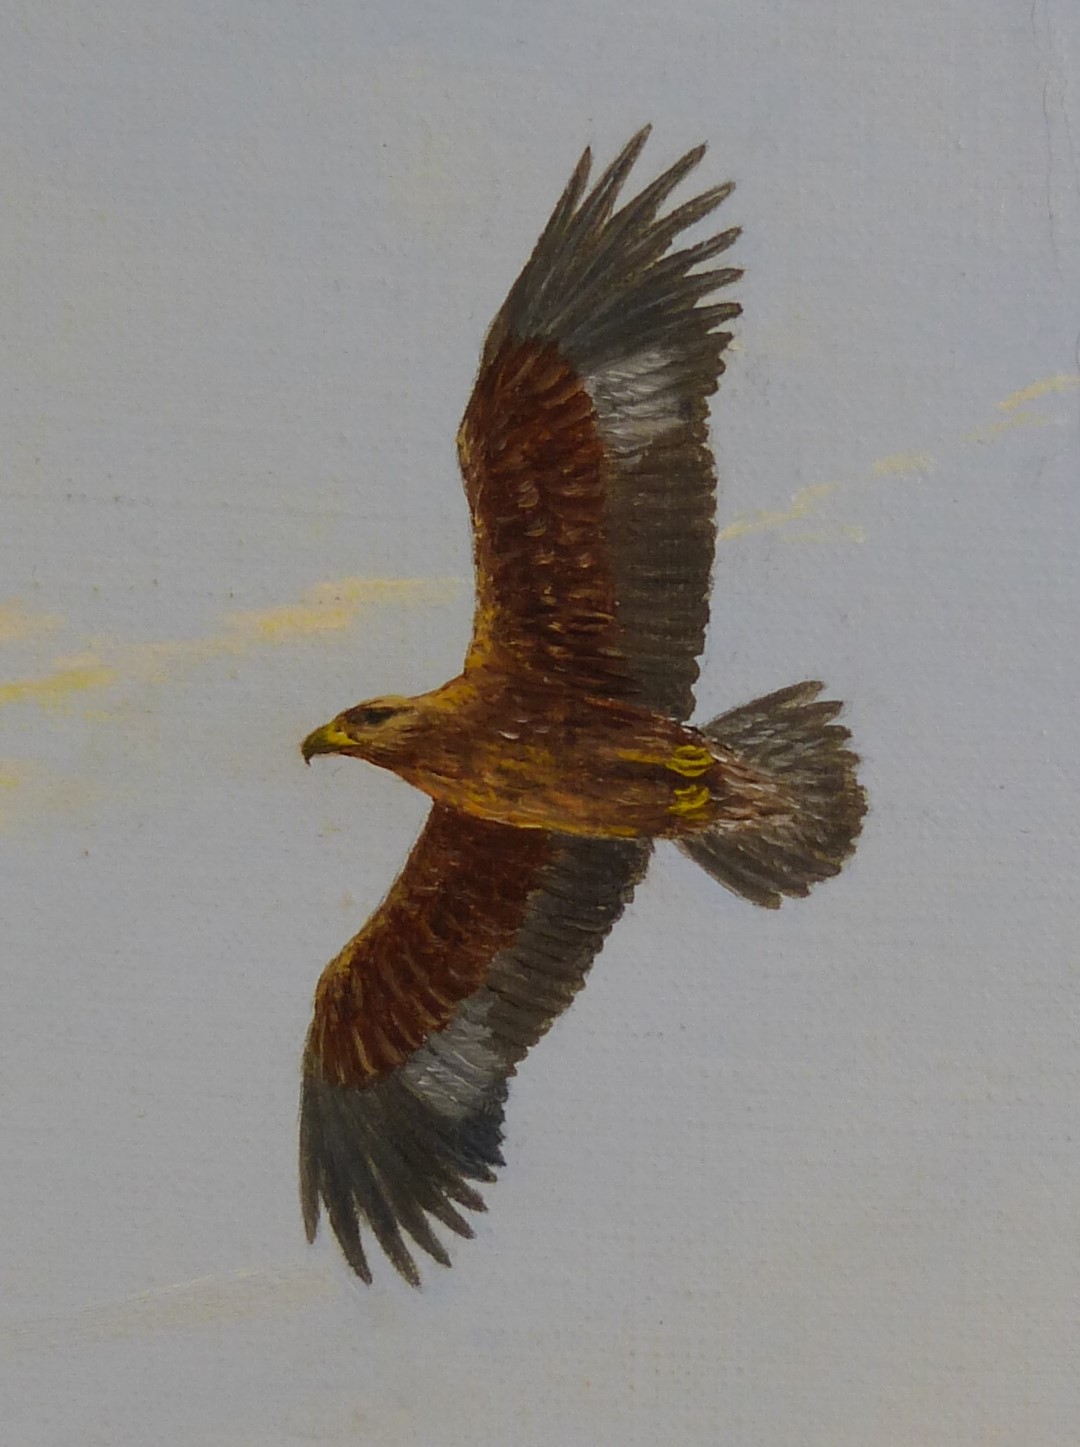 Geoffrey Campbell-Black (b1925) oil on canvas of Golden Eagle soaring in a cloudy sky, signed - Image 3 of 5